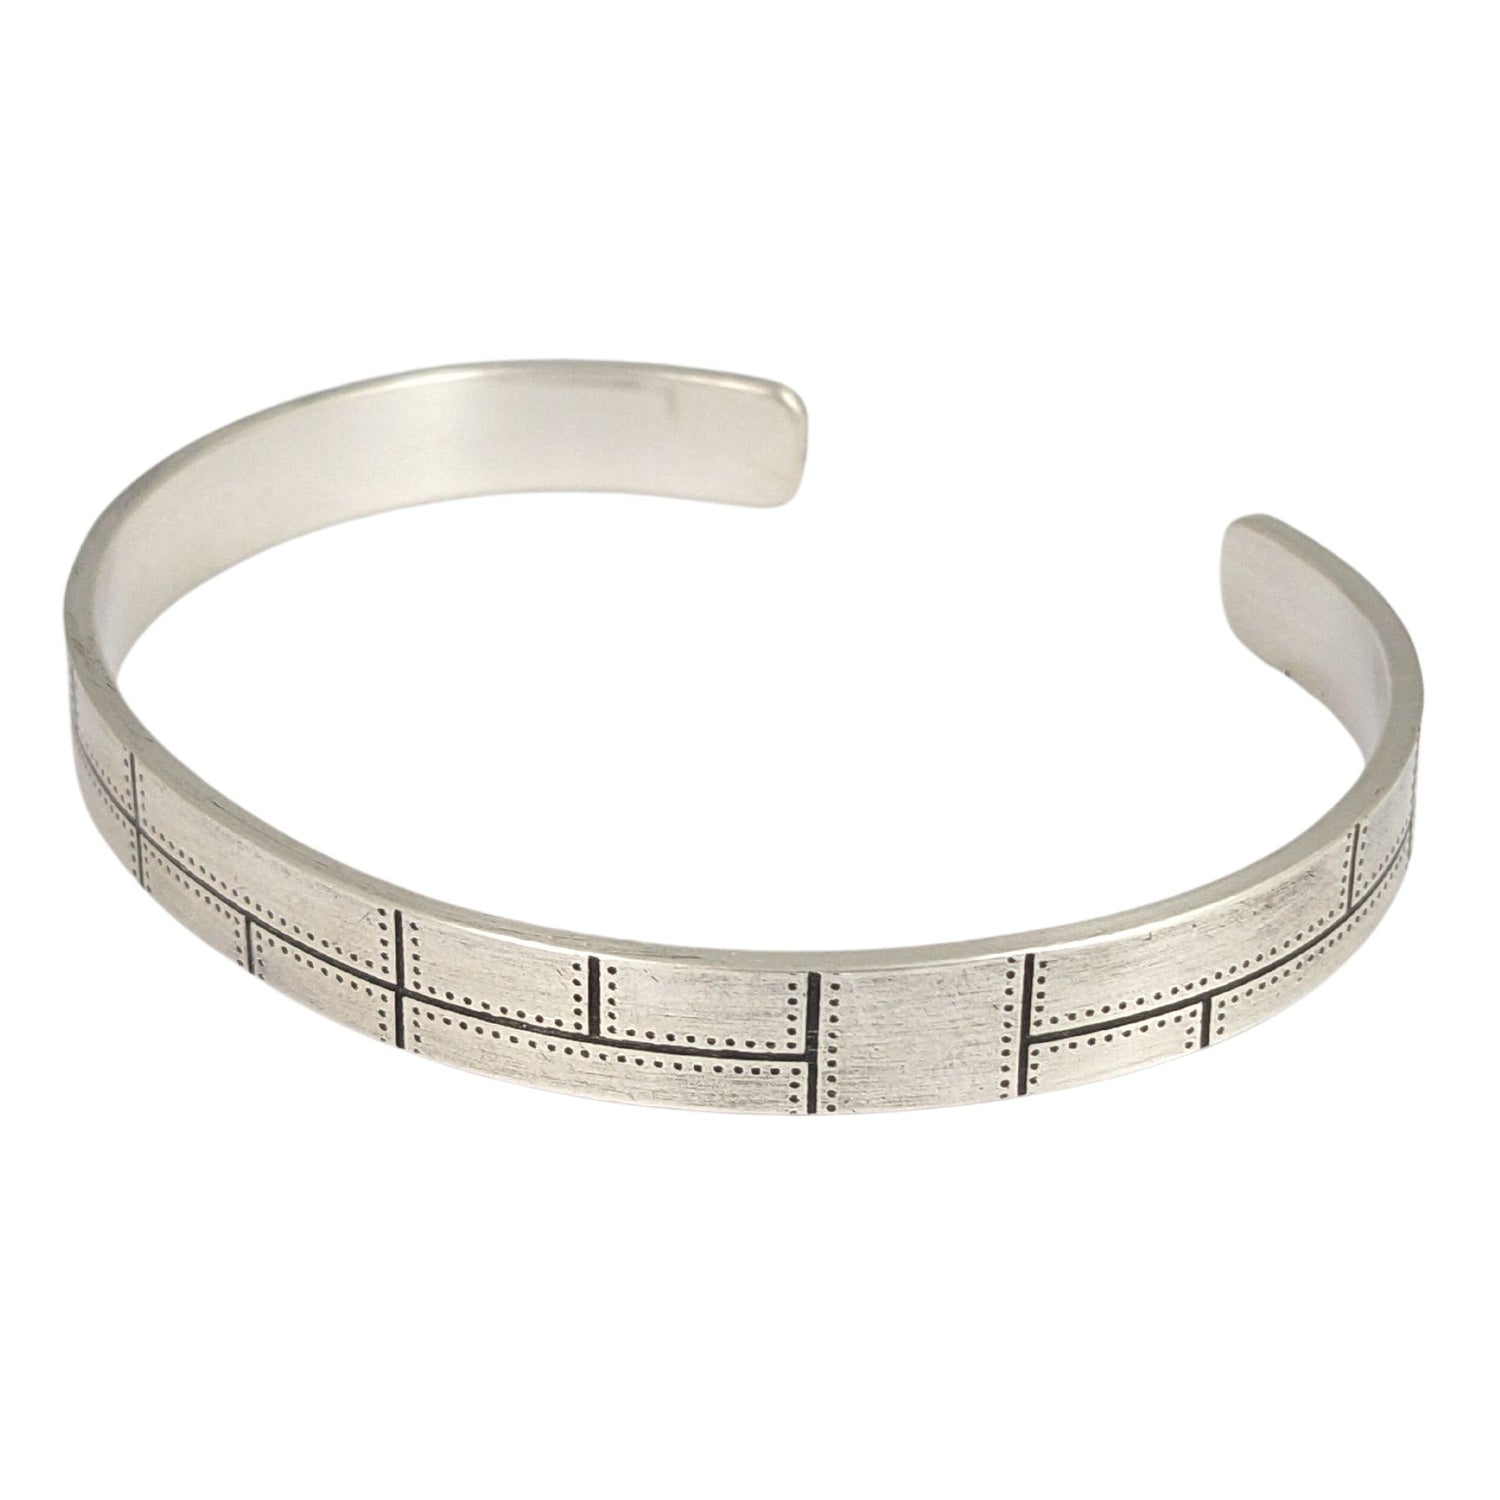 Rectangular sterling silver cuff with a riveted panel pattern. 